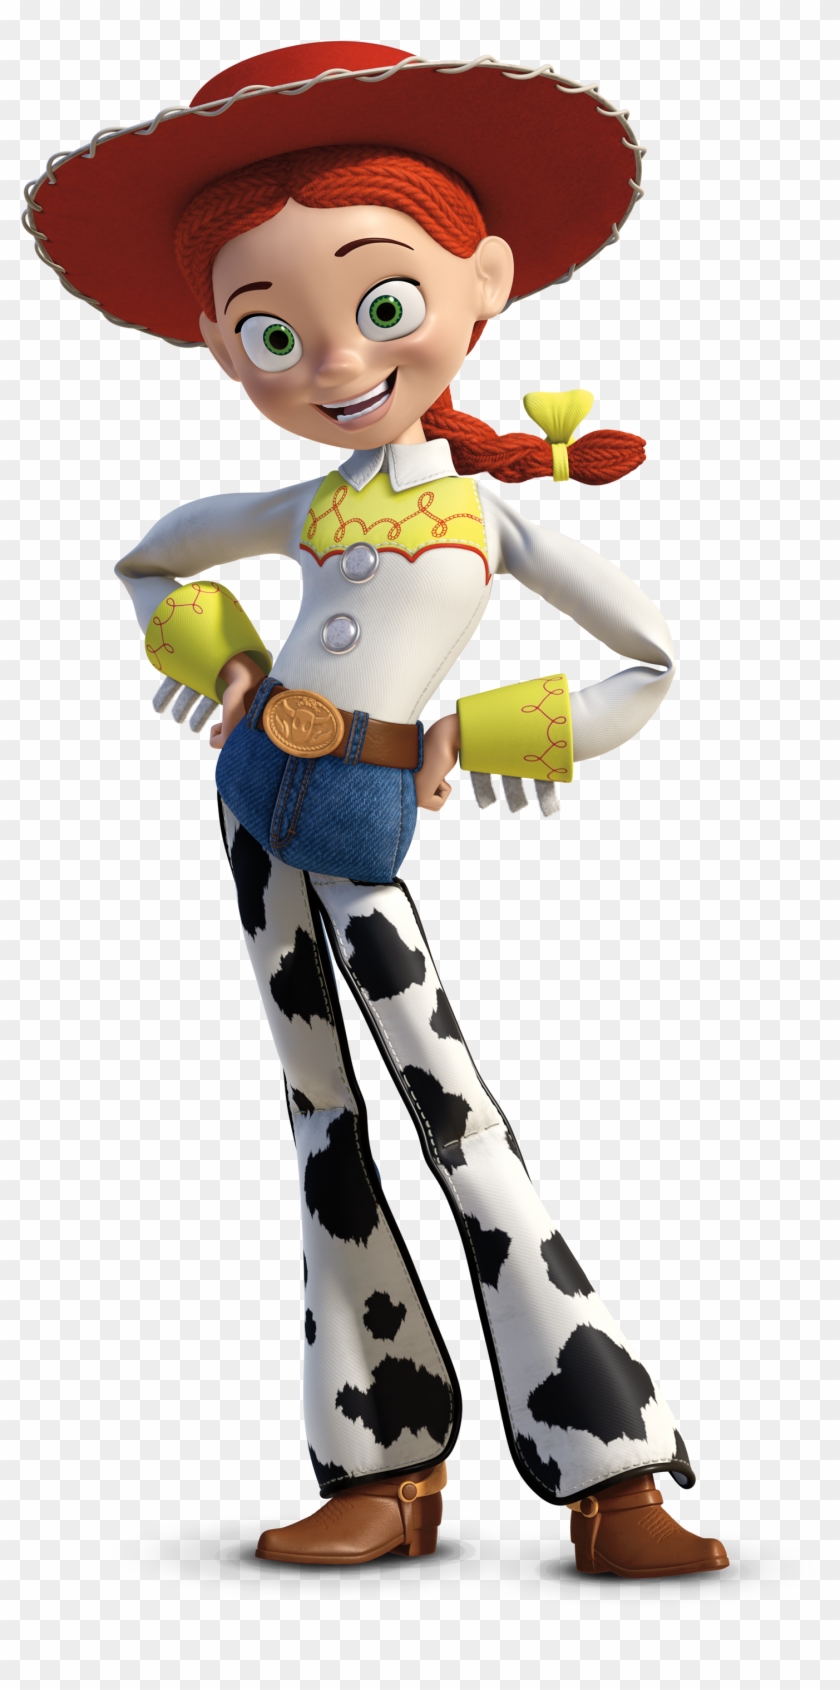 Clipart Toy Story - Jessie From Toy Story #207891